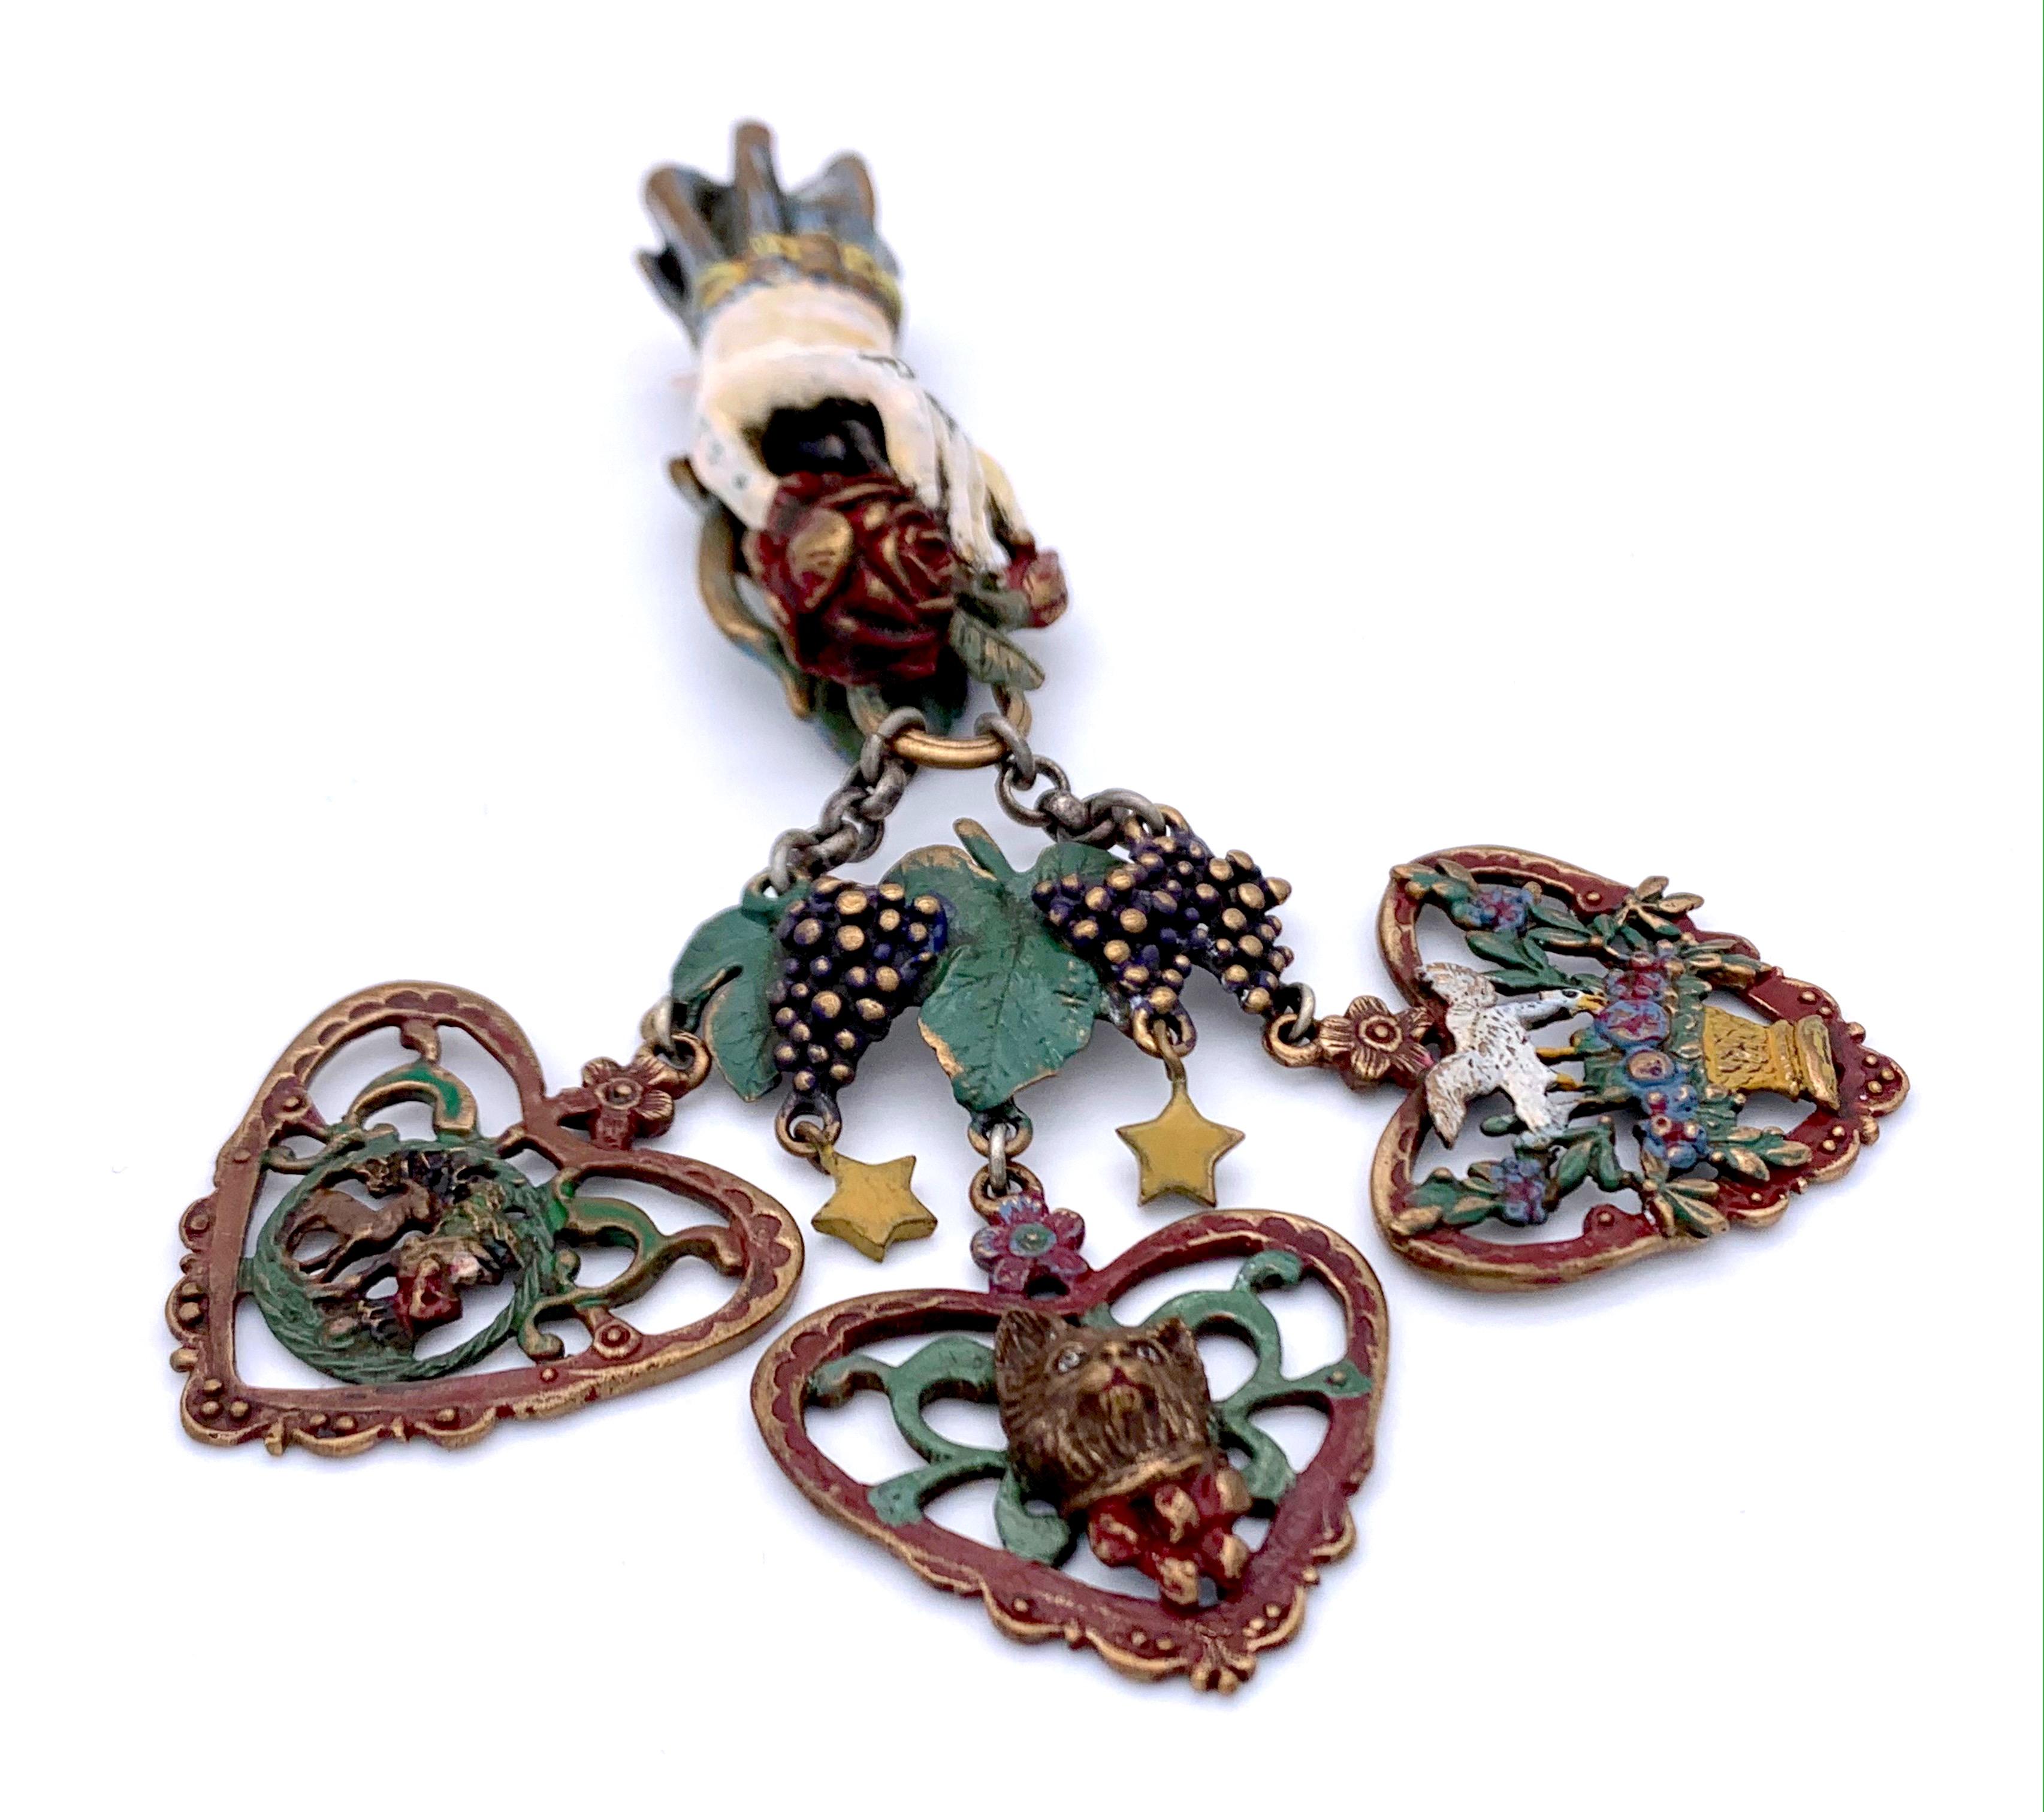 This is a vary rare piece of folkloristic wine harvest fashion accessory. The polychrome enamelled charivari was clipped onto a lady's skirt and accompanied her to a wine harvest dance.
This colourful and collectible piece of jewellery has been much